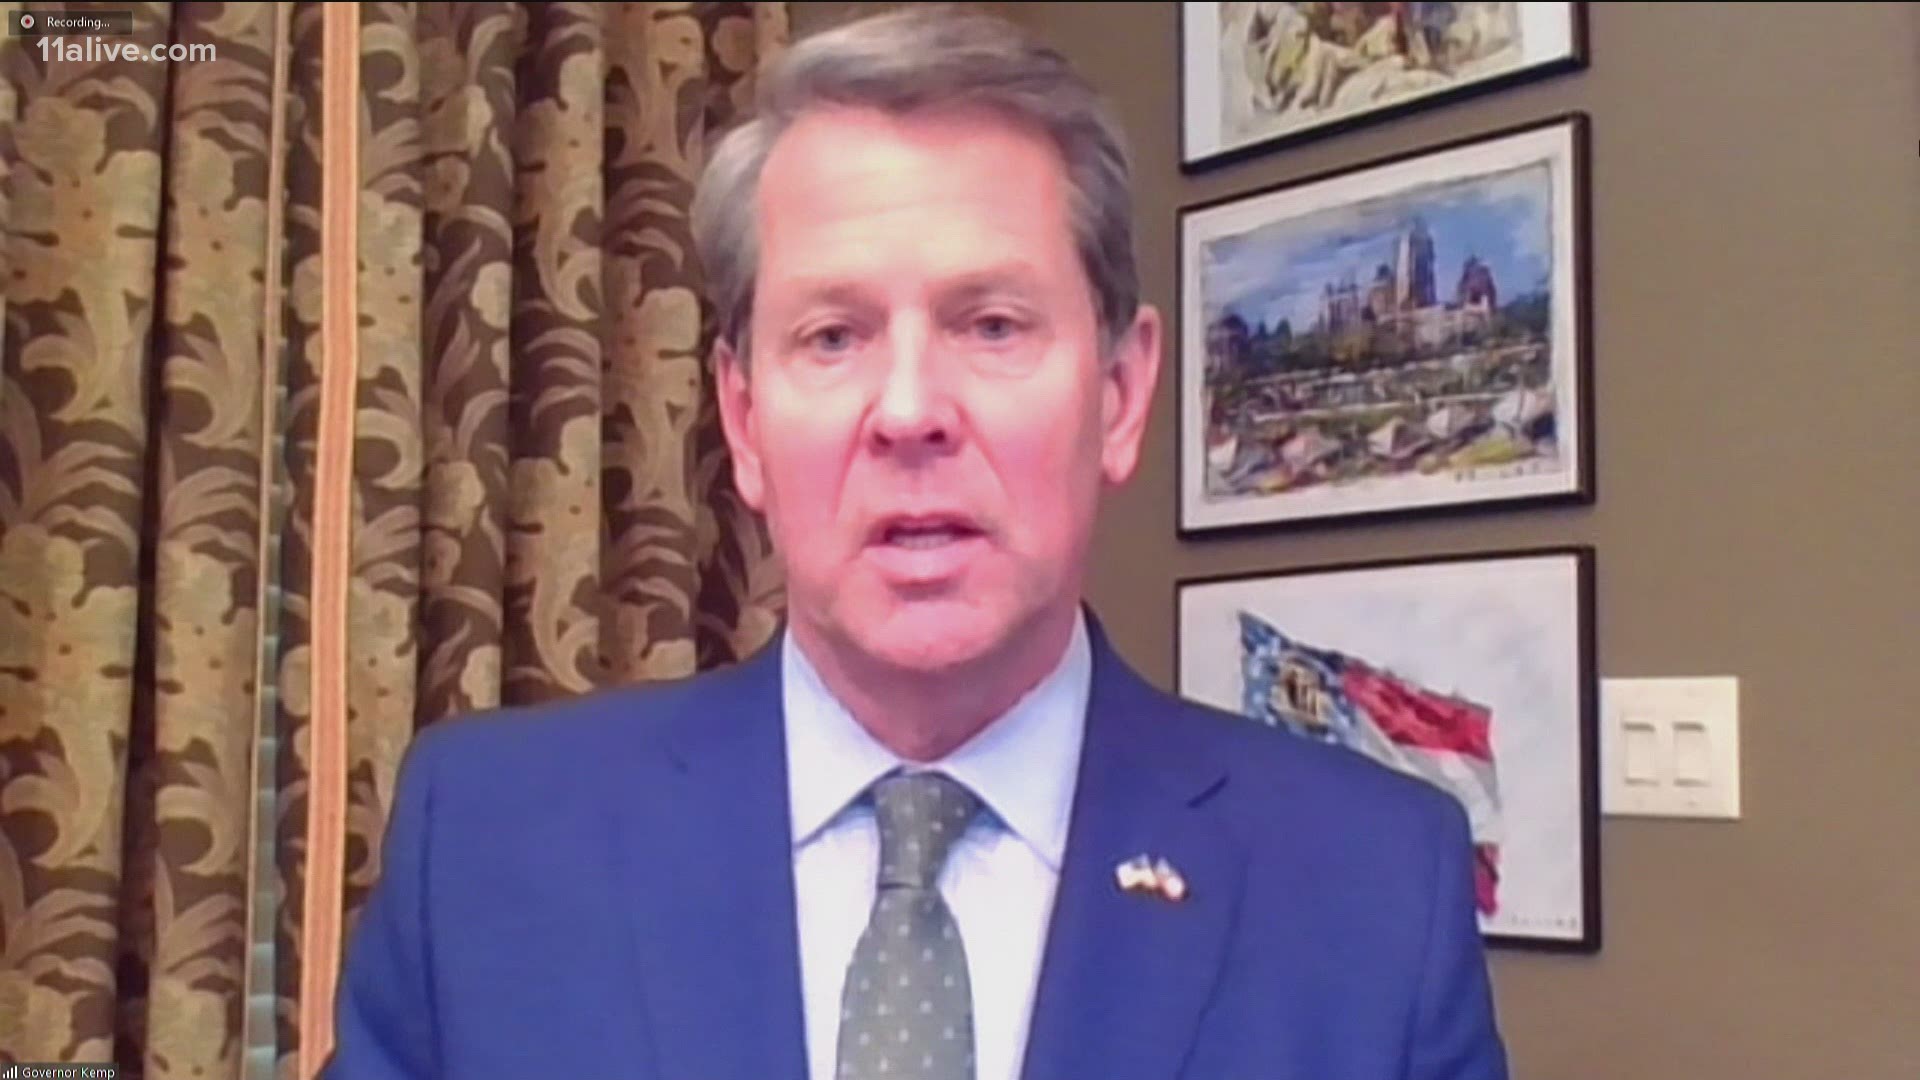 Kemp signed Senate Bill 202 last Thursday, and the criticism followed shortly after.